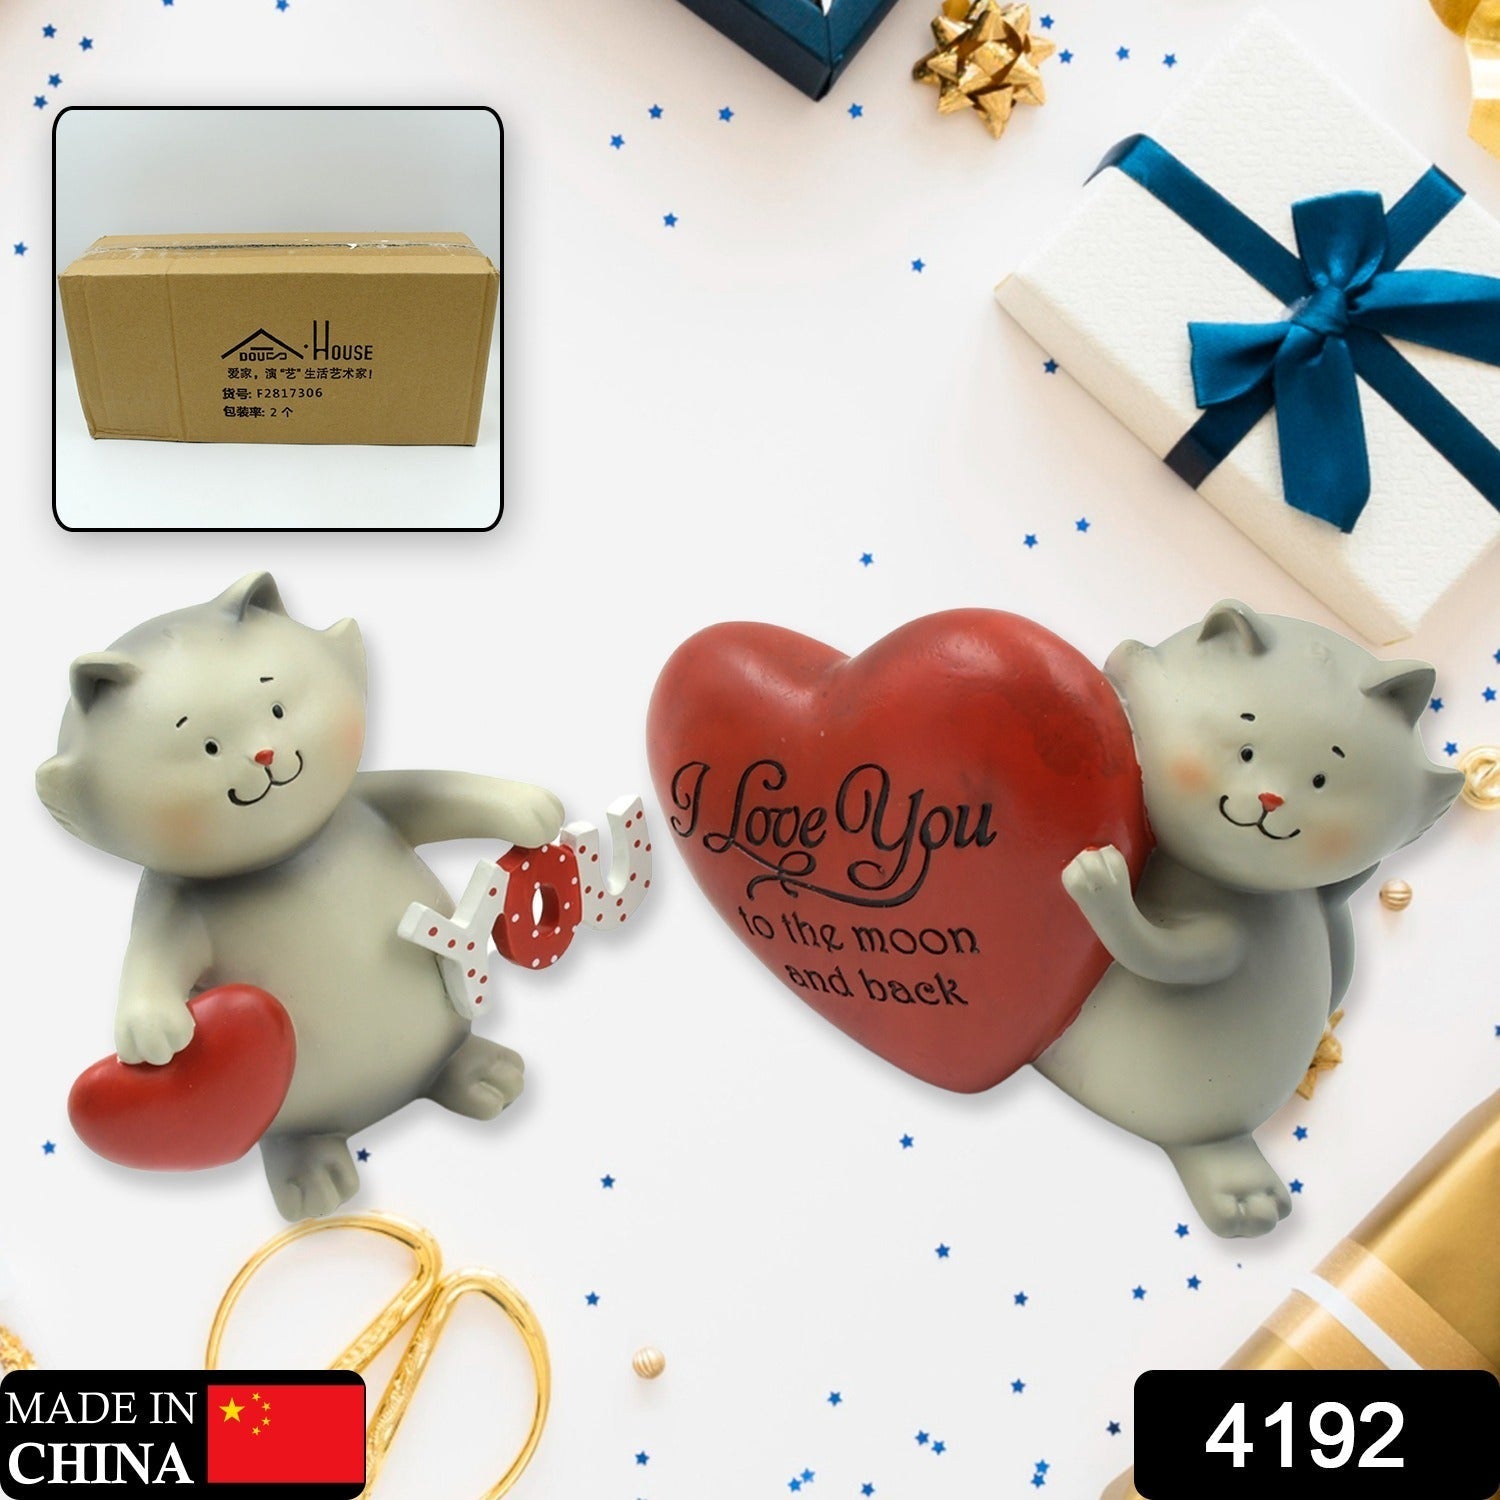 4192 Cute Cartoon Lovely Gift Set, Couple Love showpiece Valentines Day Gift, I Love You Gift, Cute Anniversary, Wedding, Birthday, Boyfriend, Husband Romantic Unique Gift Set, Home Decoration Gift Set